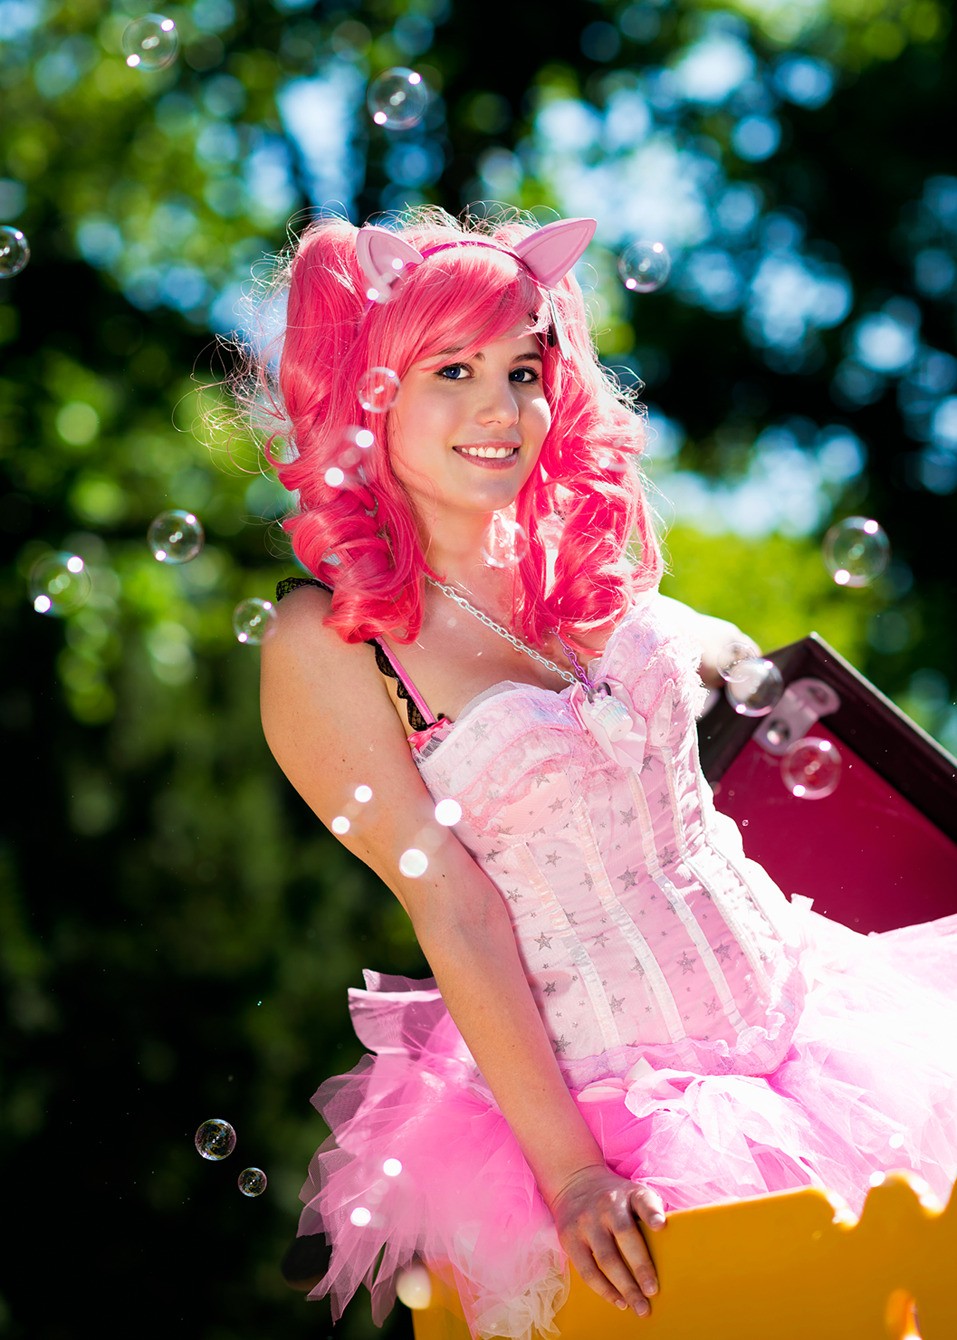 afomodblog:  kyumblr:  My cosplay of Pinkie Pie from My Little Pony: Friendship is